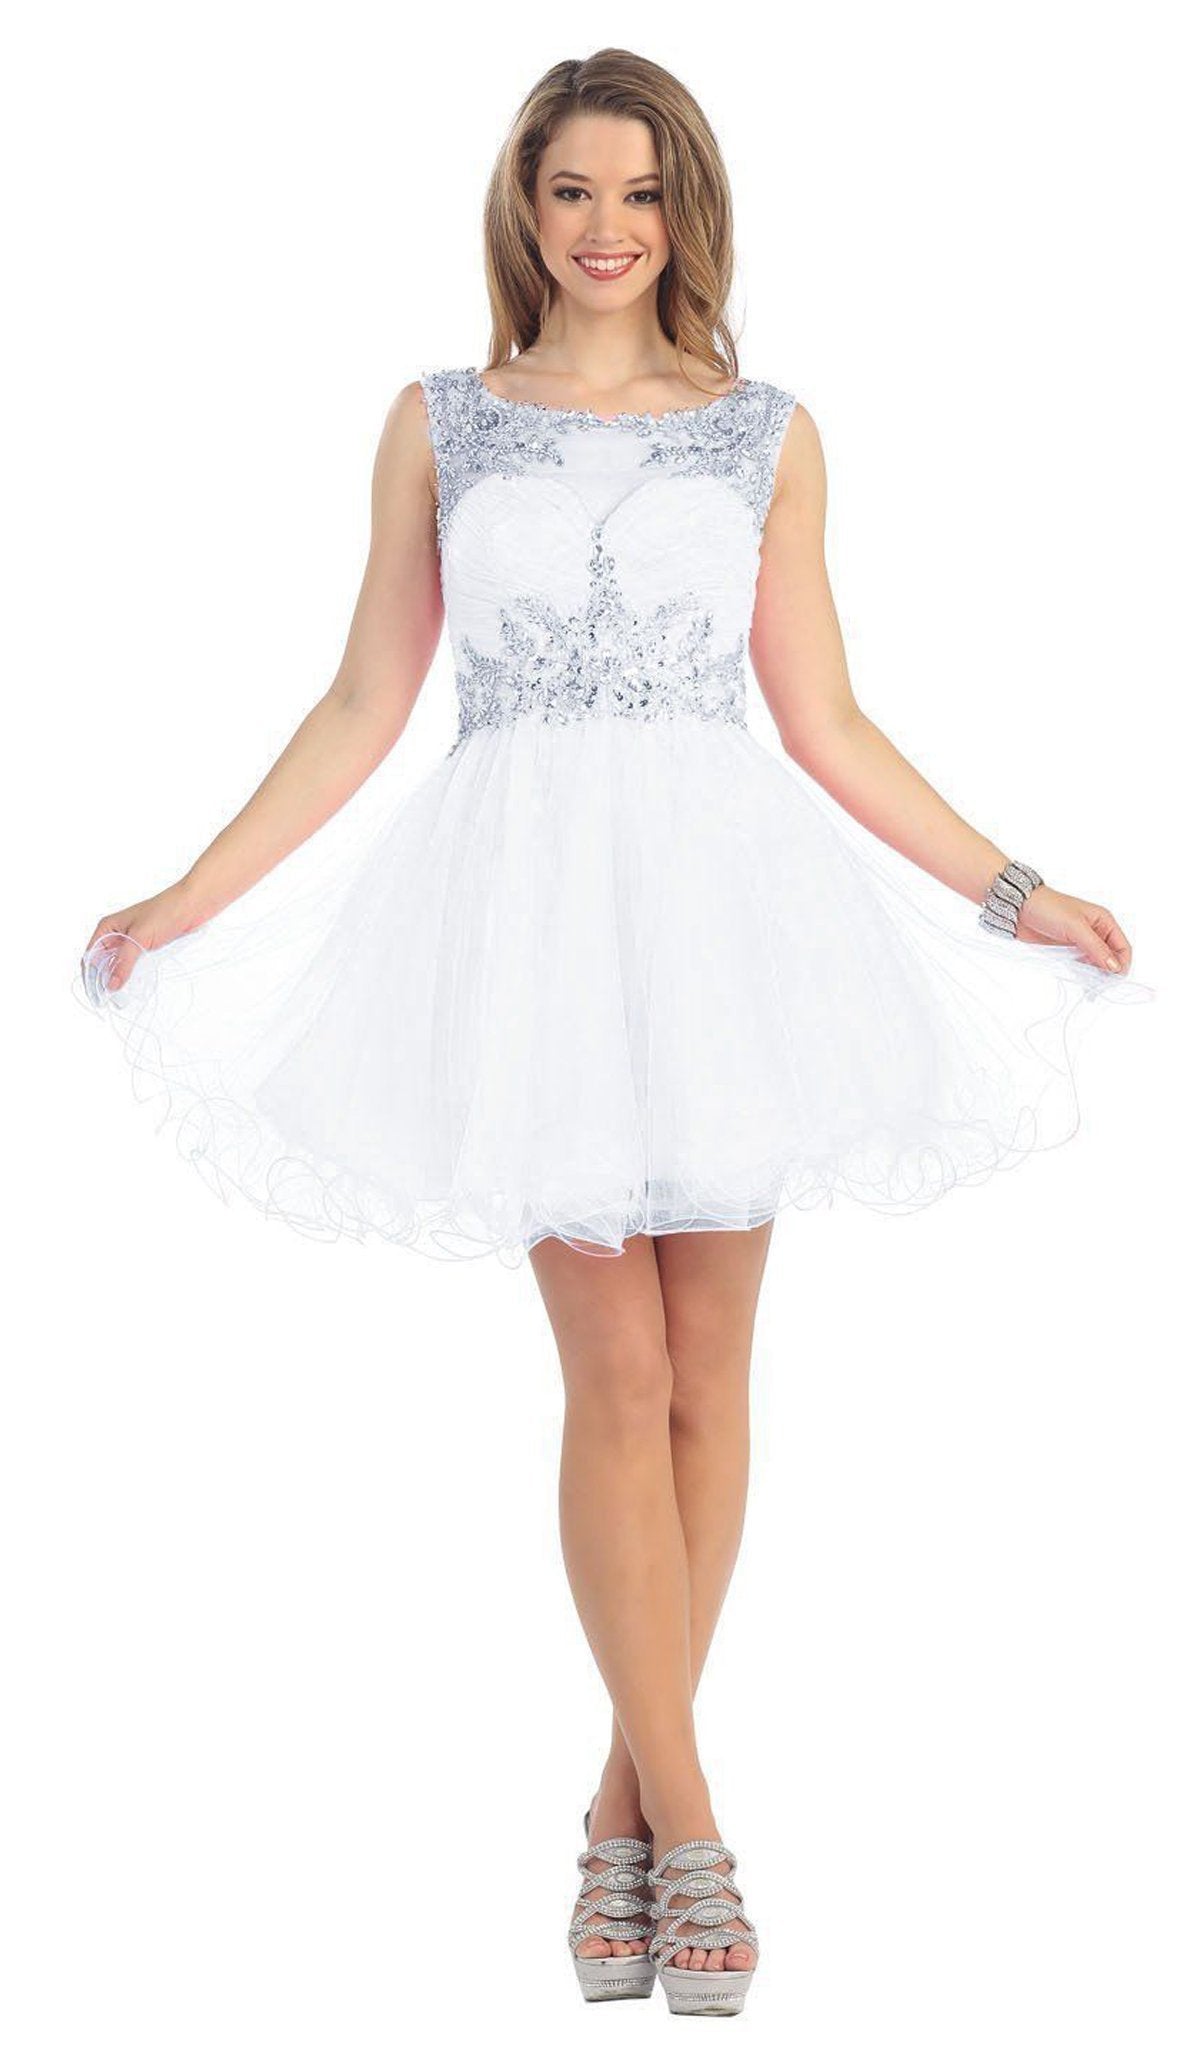 May Queen - Stunning Beaded Illusion Neck Cocktail Dress Special Occasion Dress 4 / White